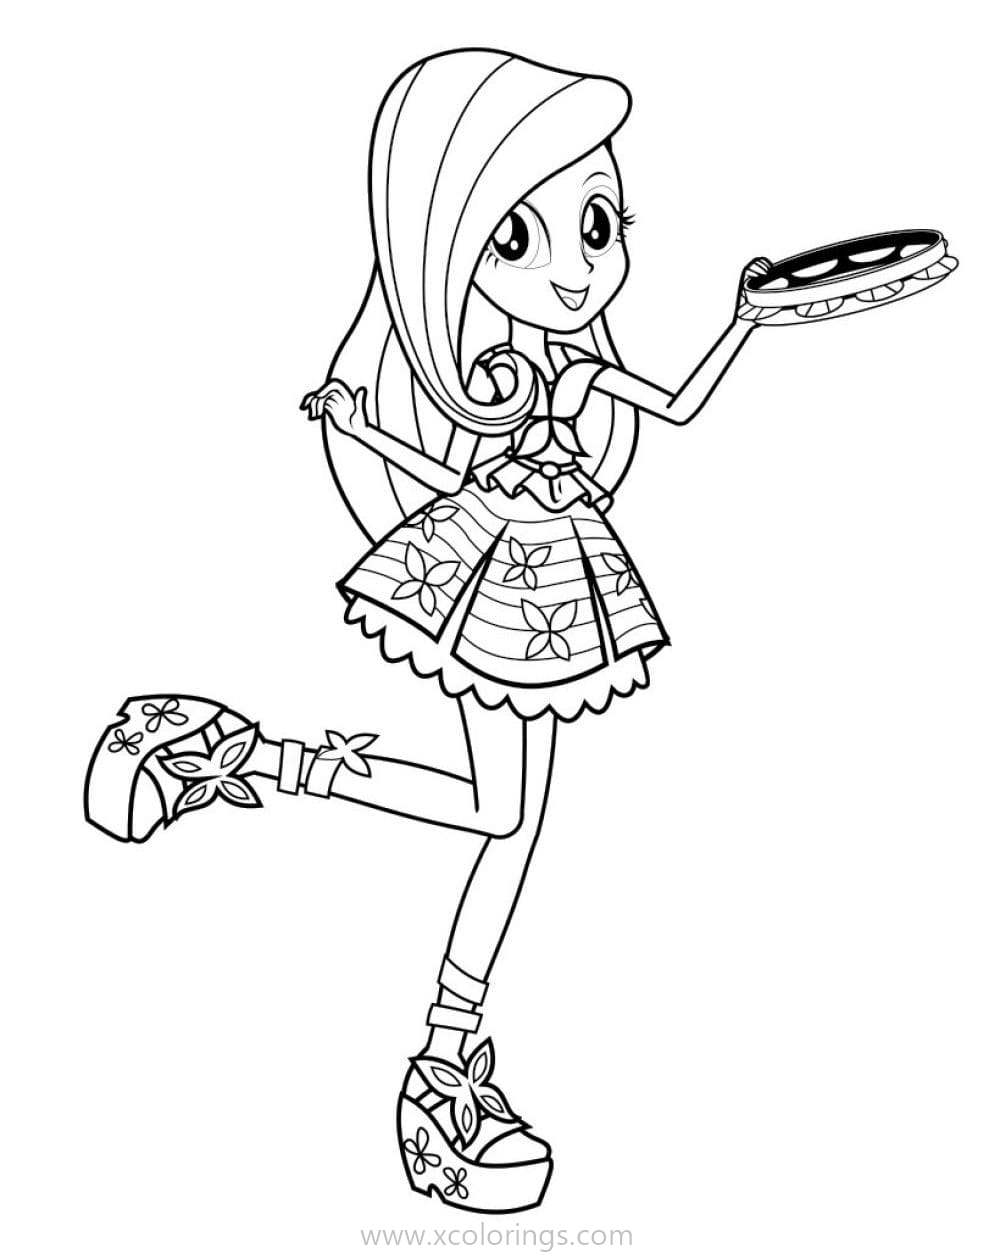 Free Equestria Girls Coloring Pages Fluttershy is Dancing printable